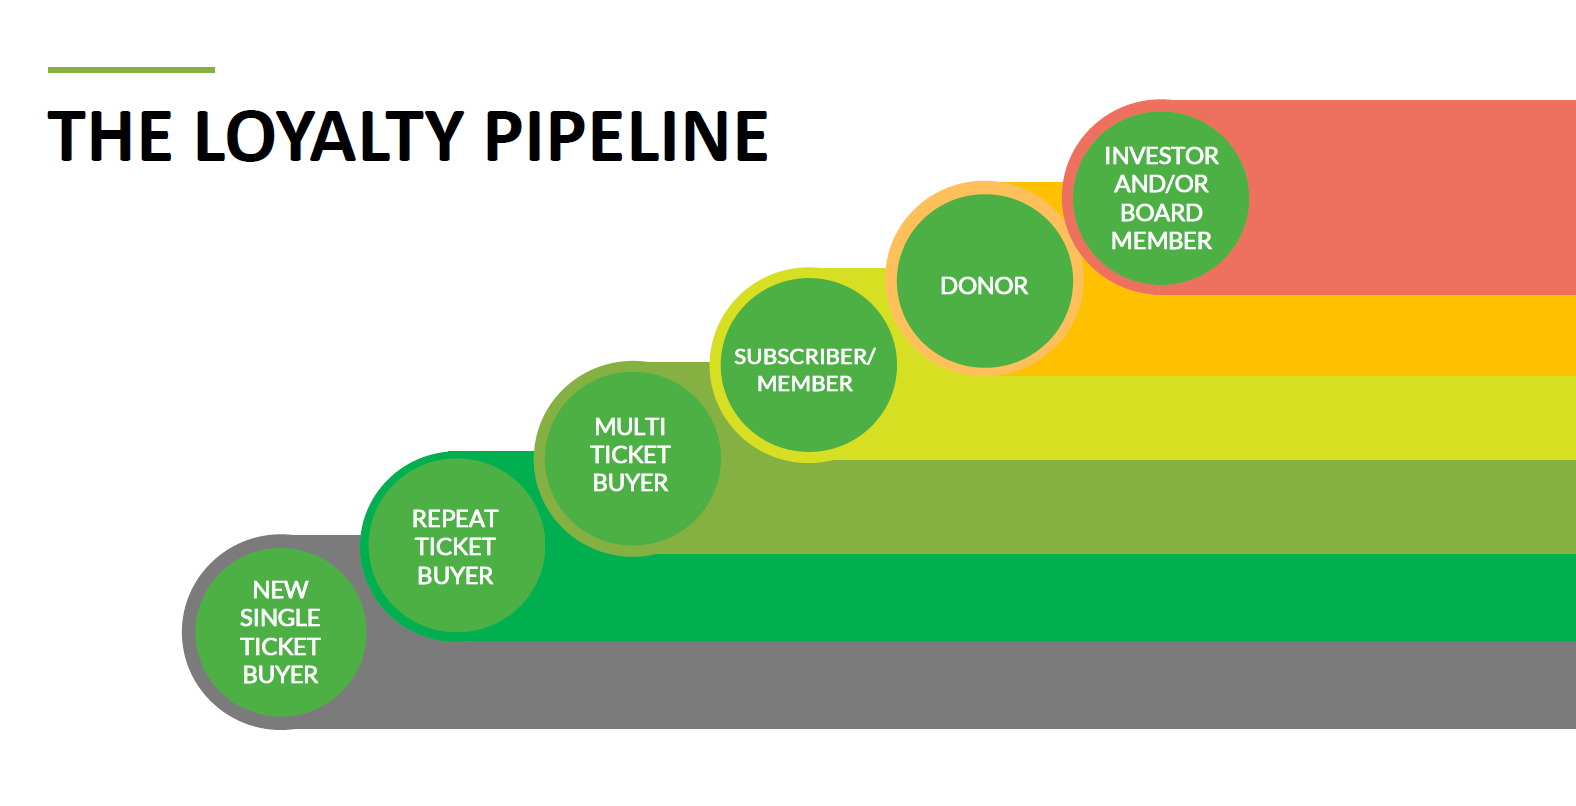 The loyalty pipeline - from new ticket buyer to investor, via repeat visits, subscriber and donor